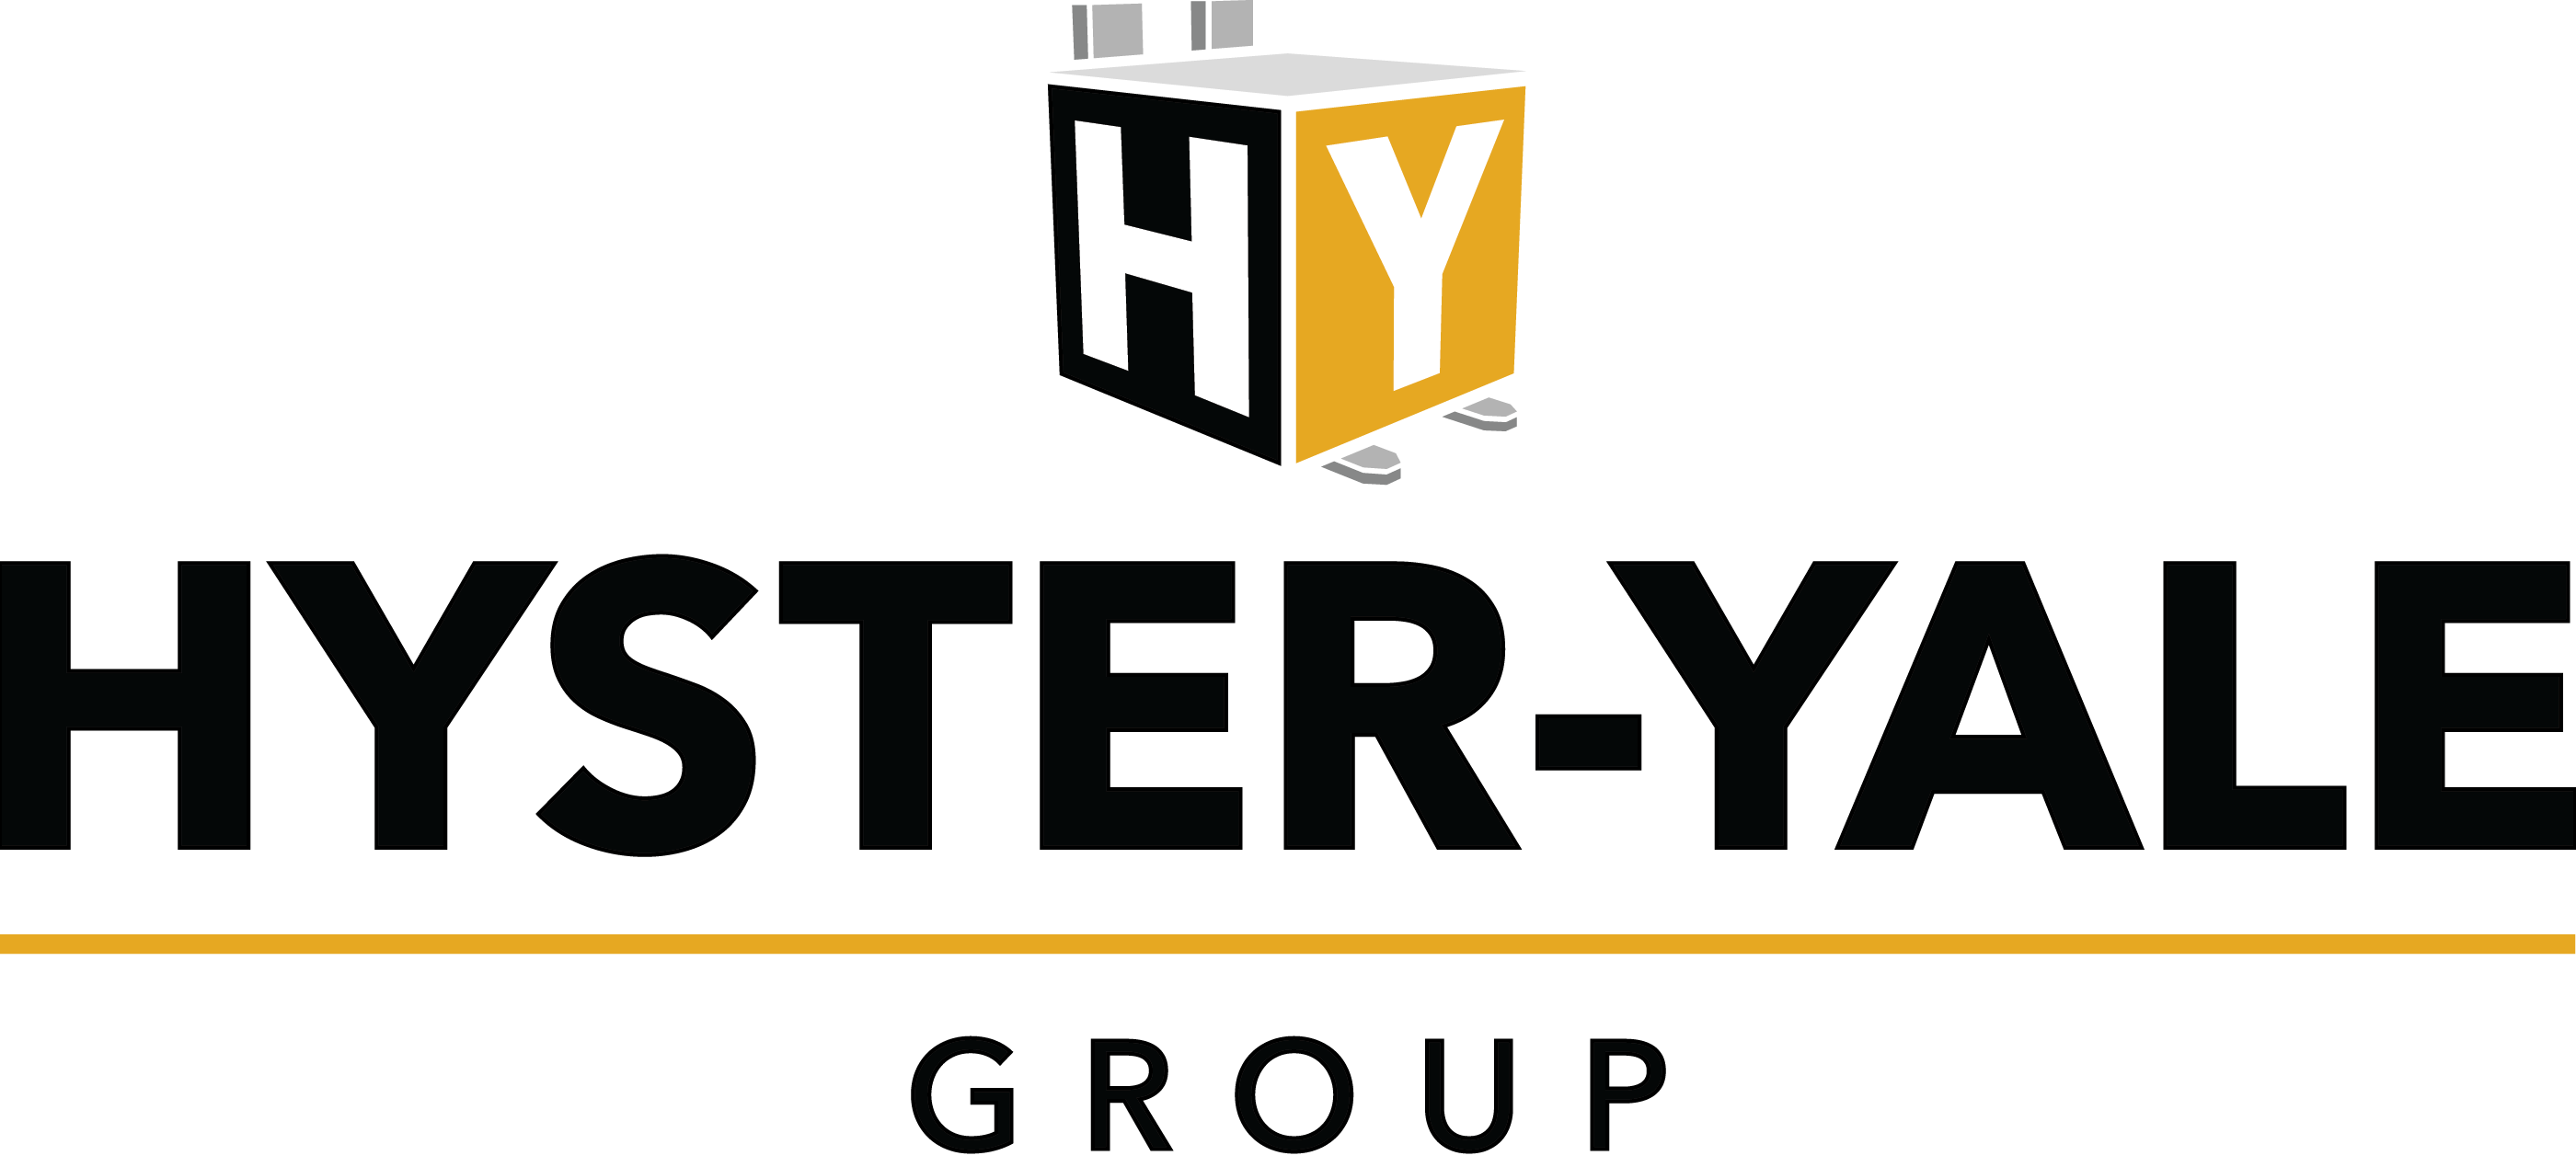 Hyster-yale group logo